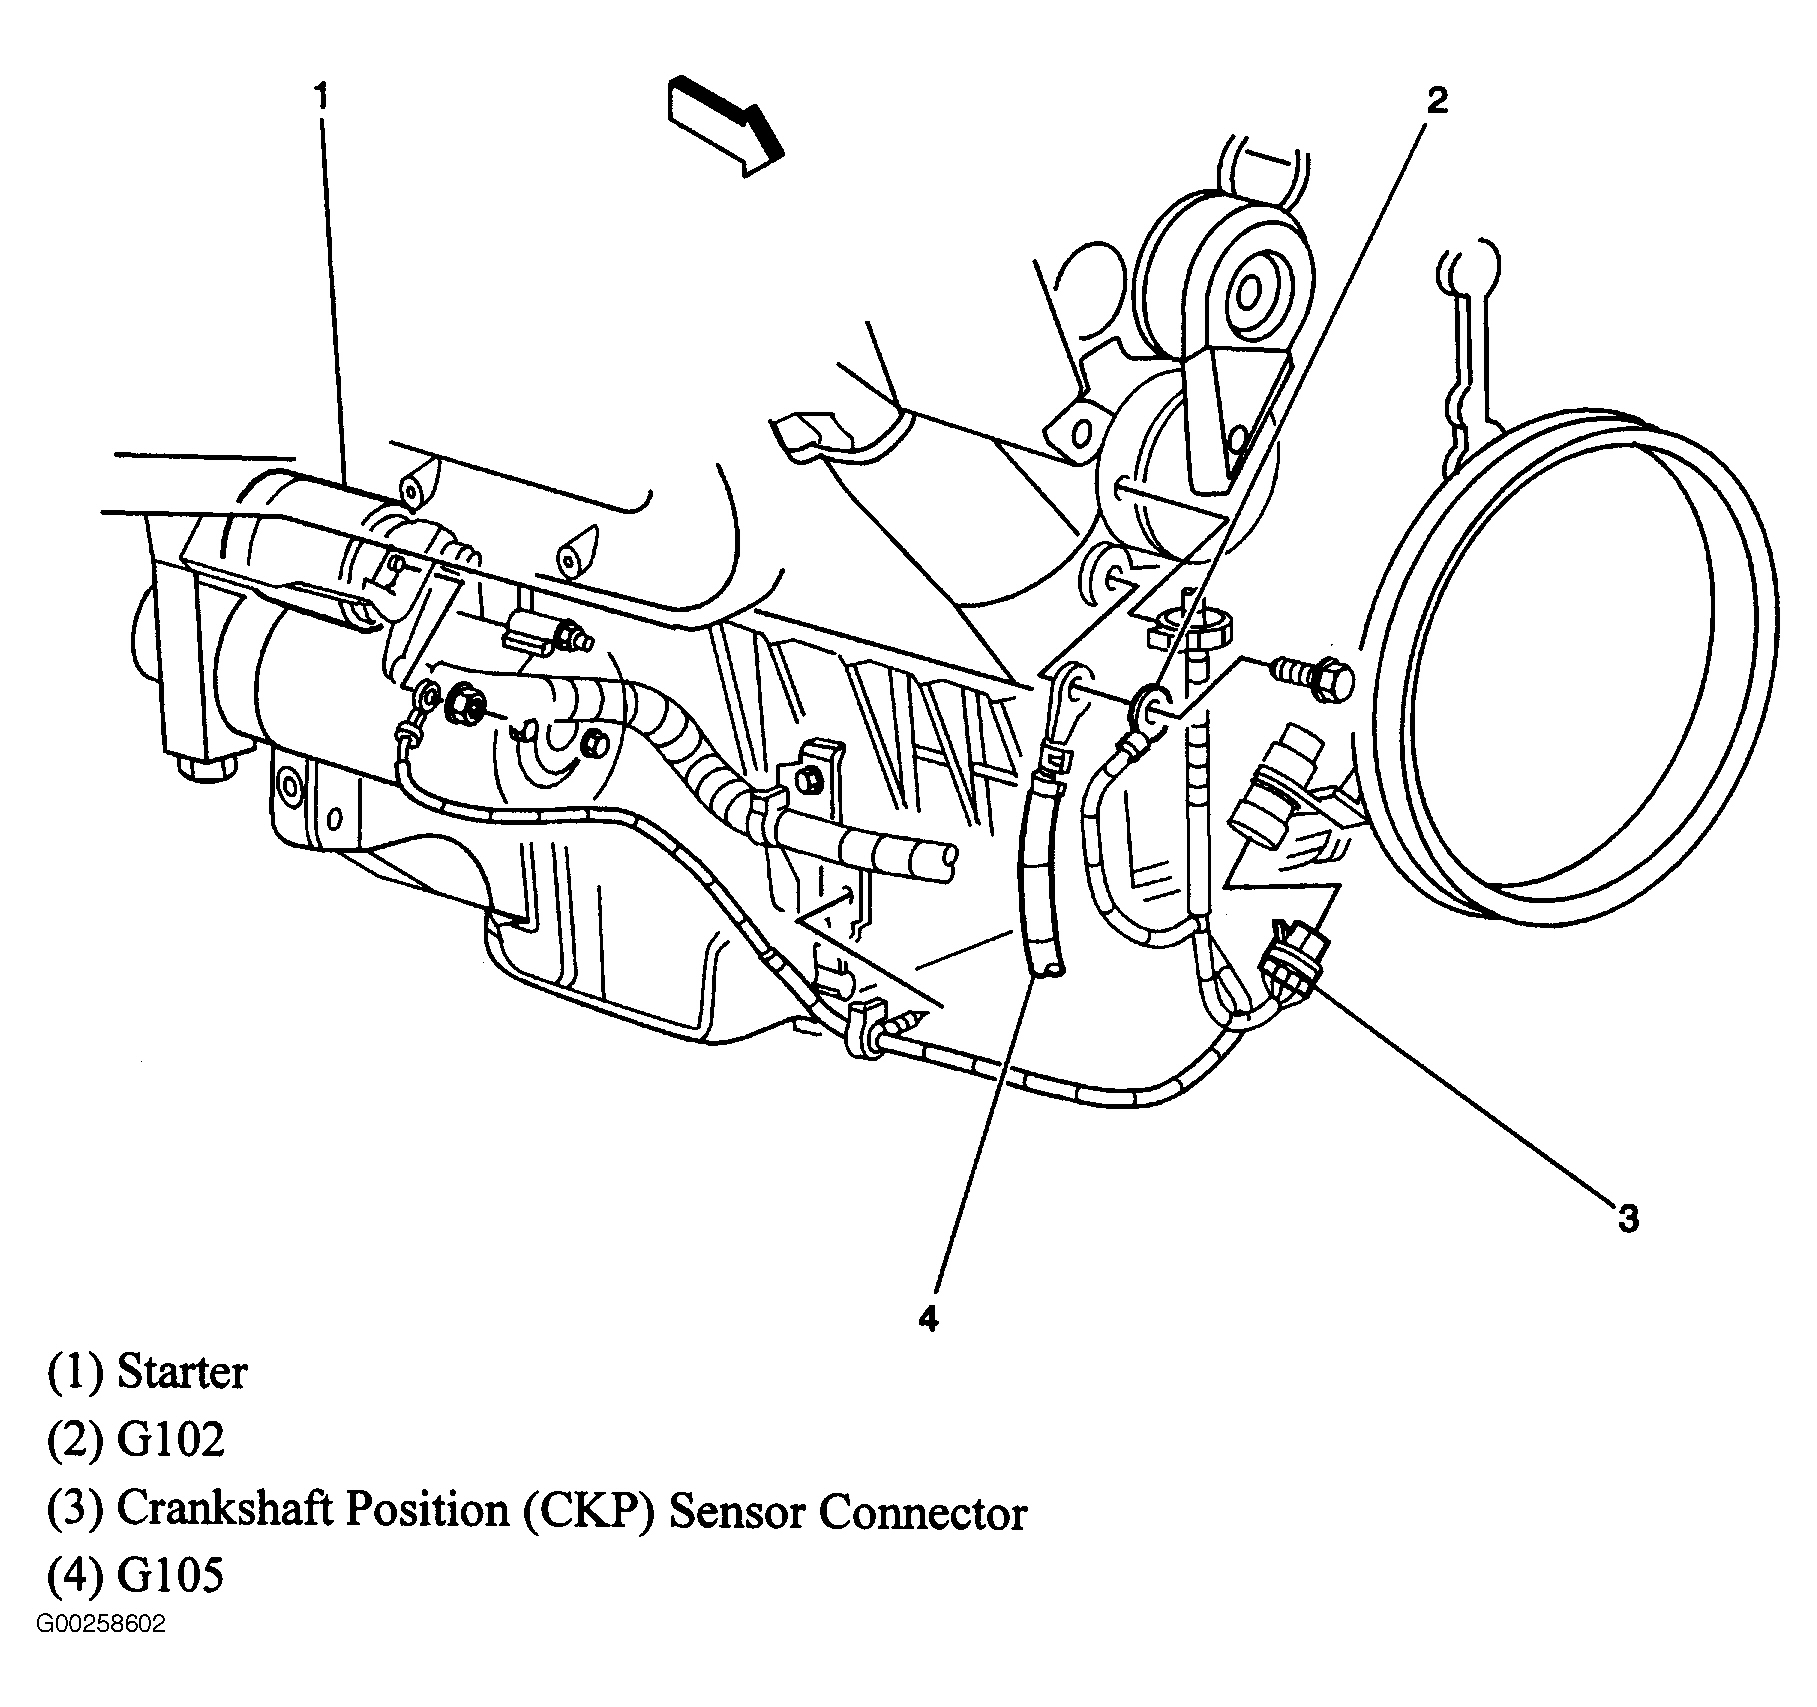 GMC Sierra Classic 3500 2007 - Component Locations -  Lower Right Side Of Engine (4.3L, 4.8L, 5.3L & 6.0L)